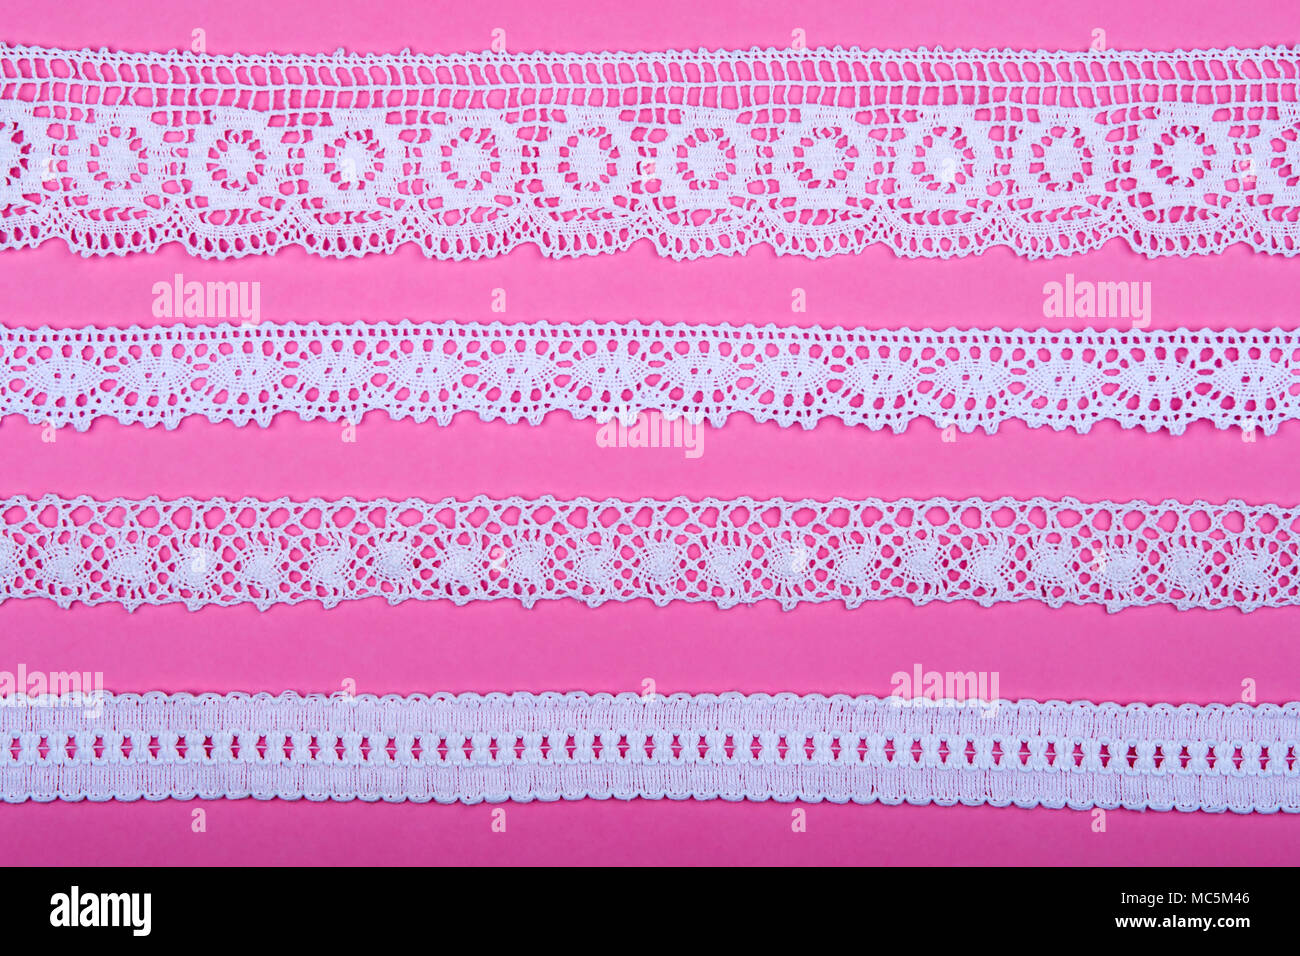 4 different lace borders against pink background. Stock Photo